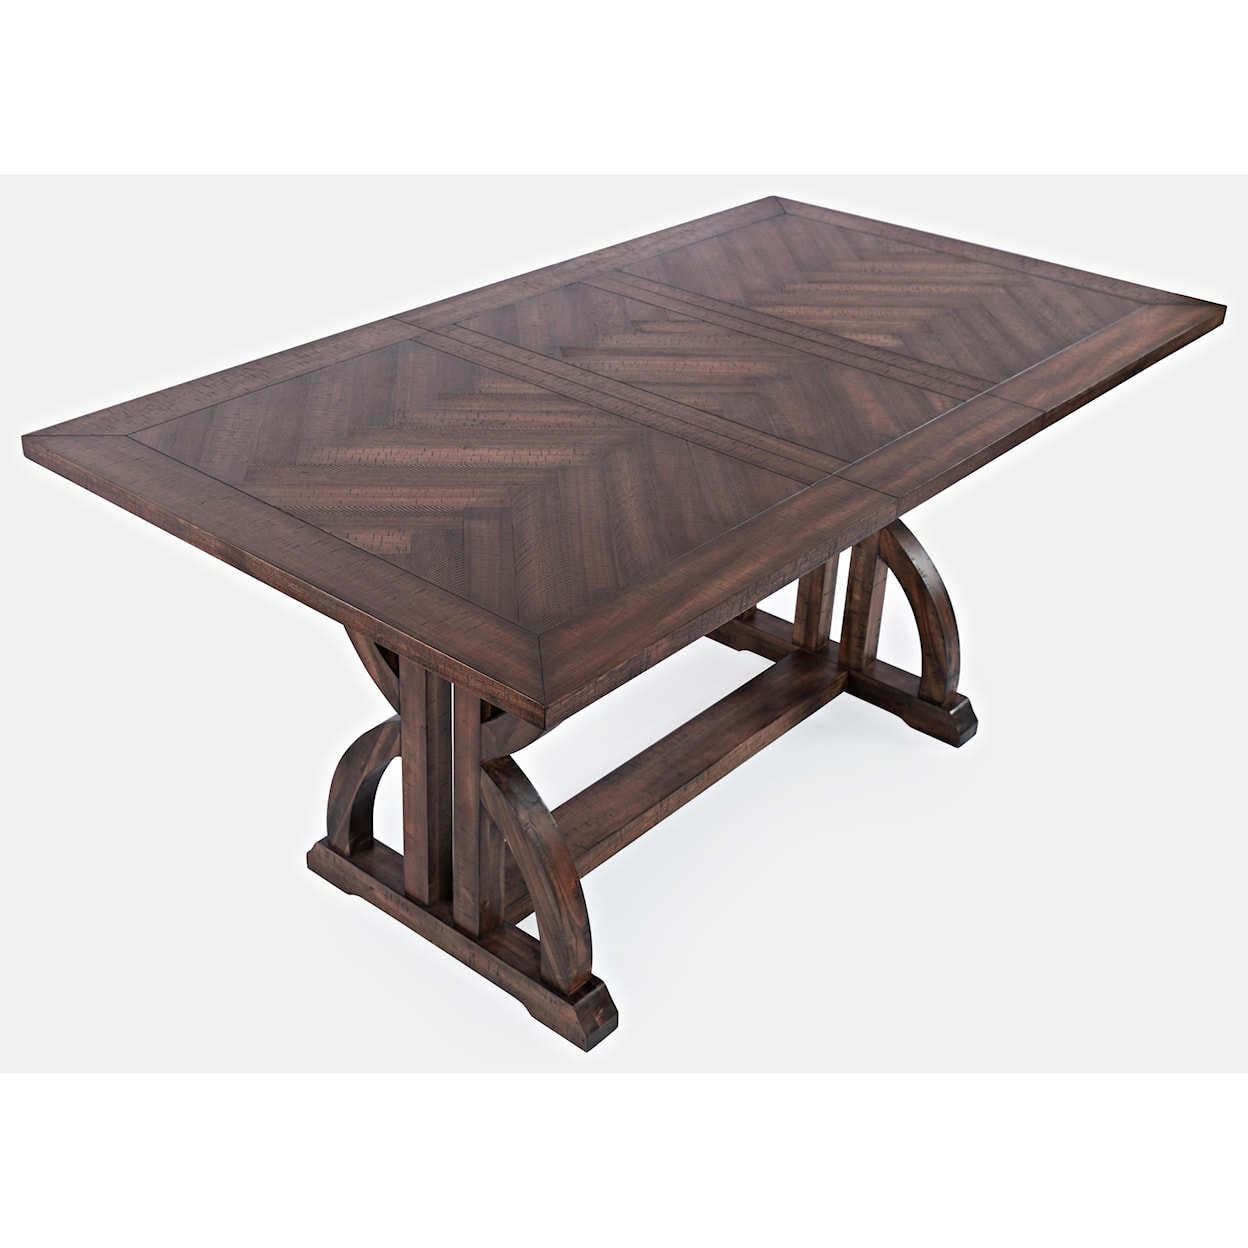 VFM Signature Fairview Counter Height Table